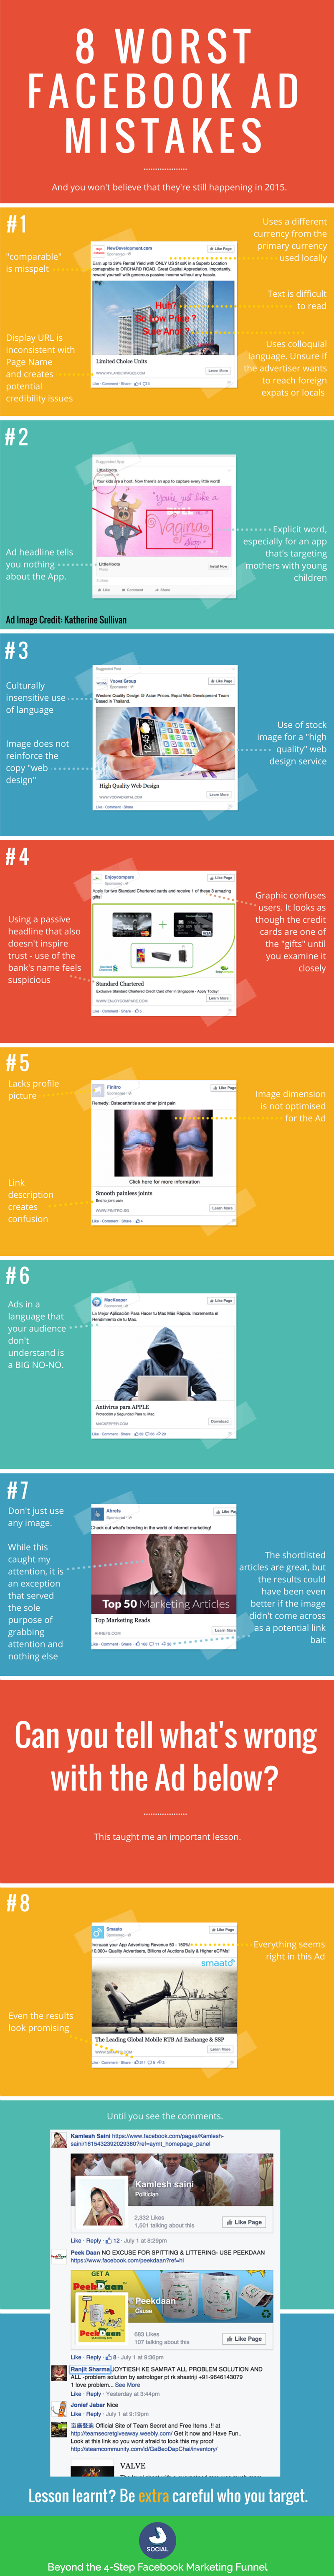 8 Facebook Ads Mistakes You Should Never Make - #infographic